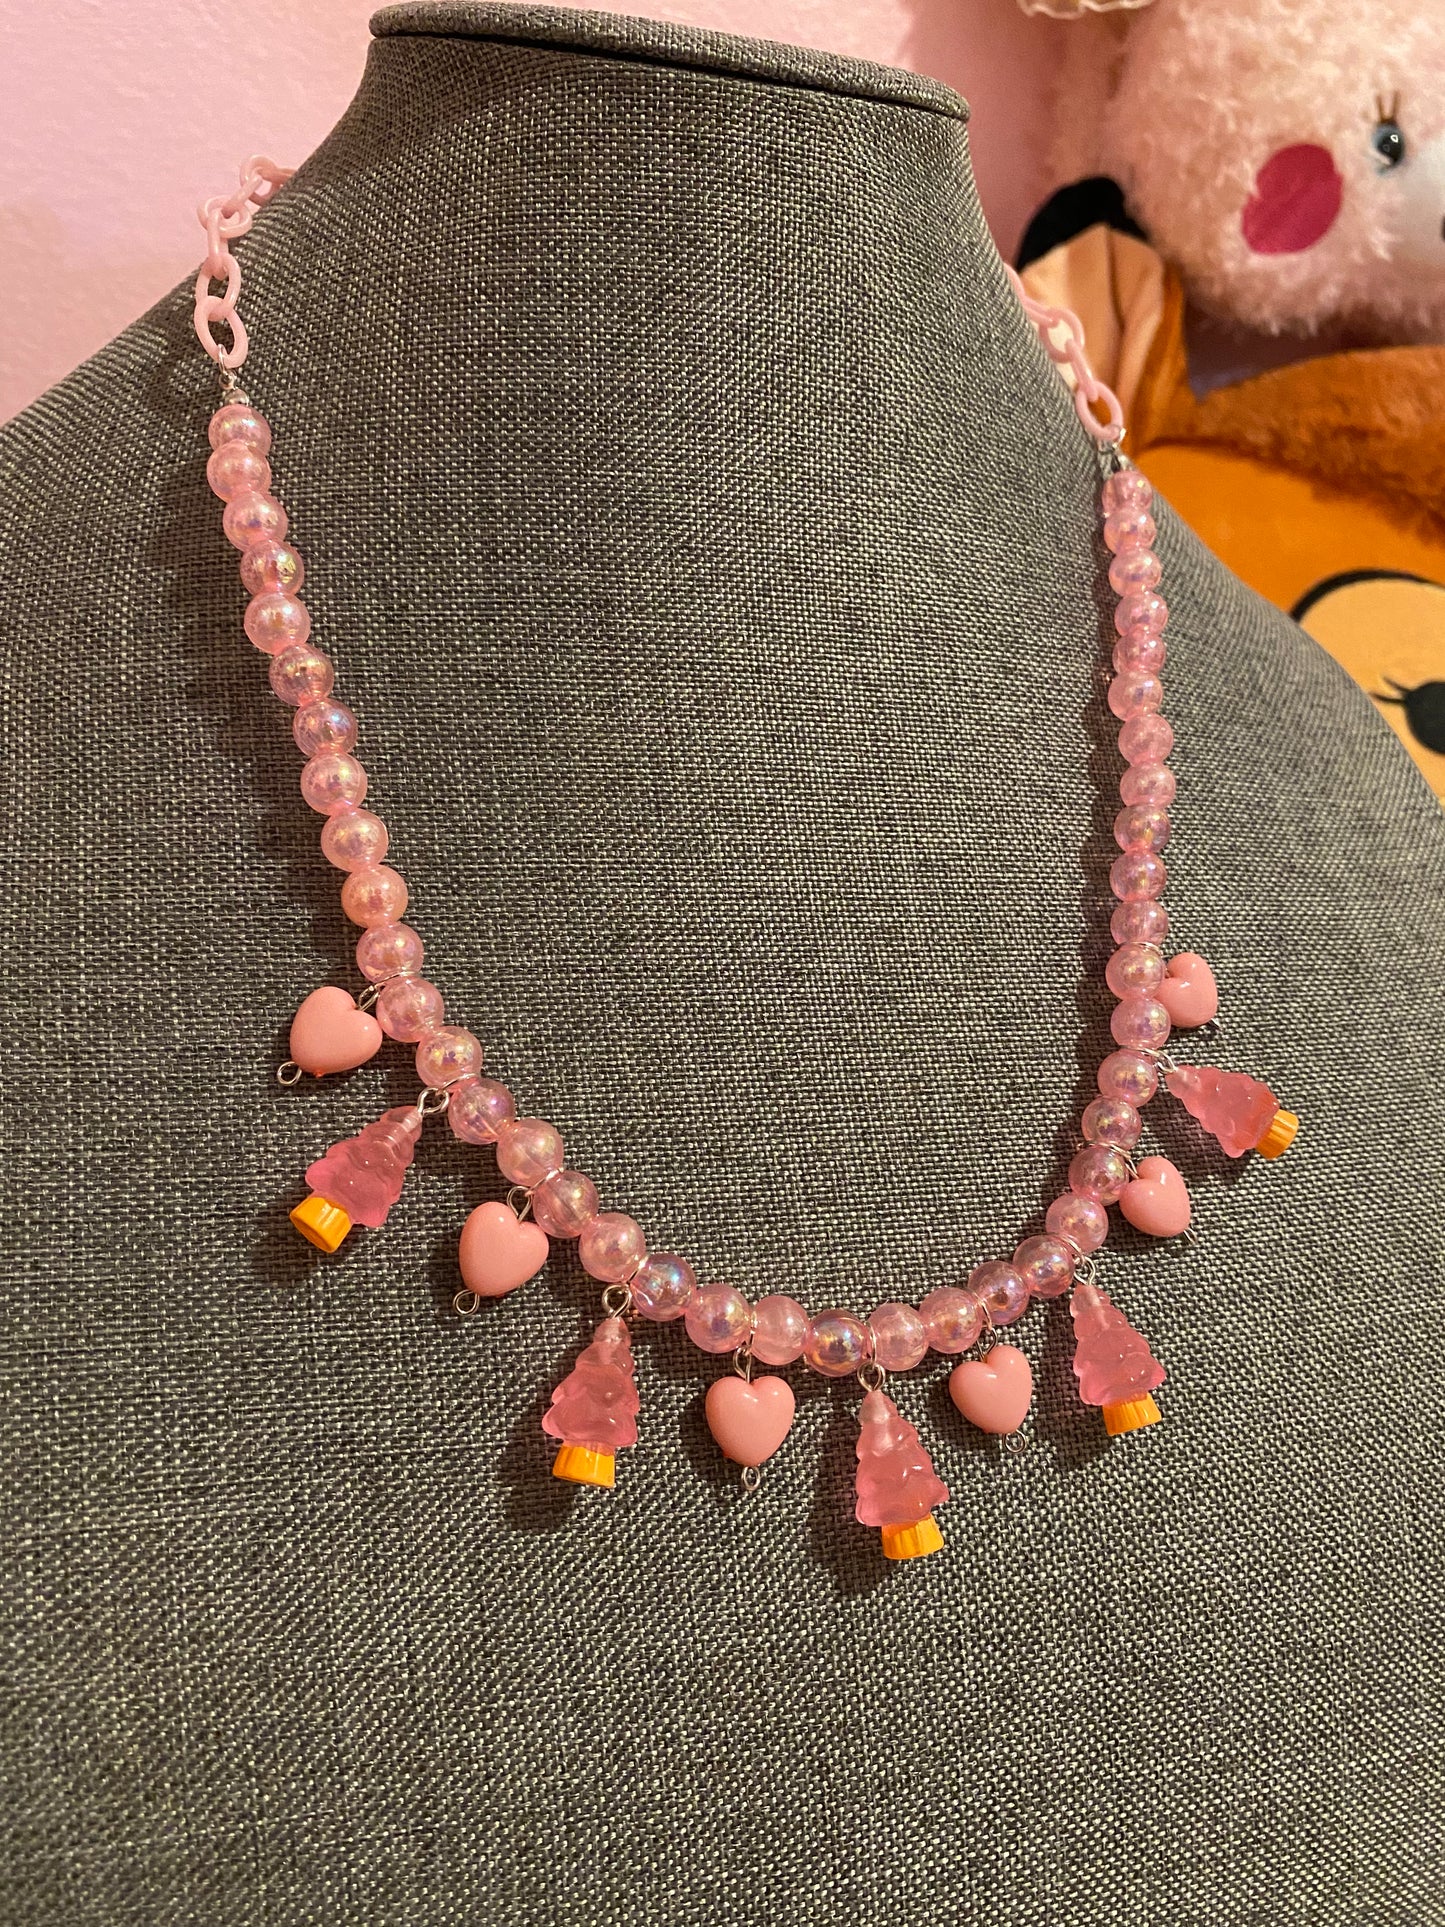 Pink Tree Necklace